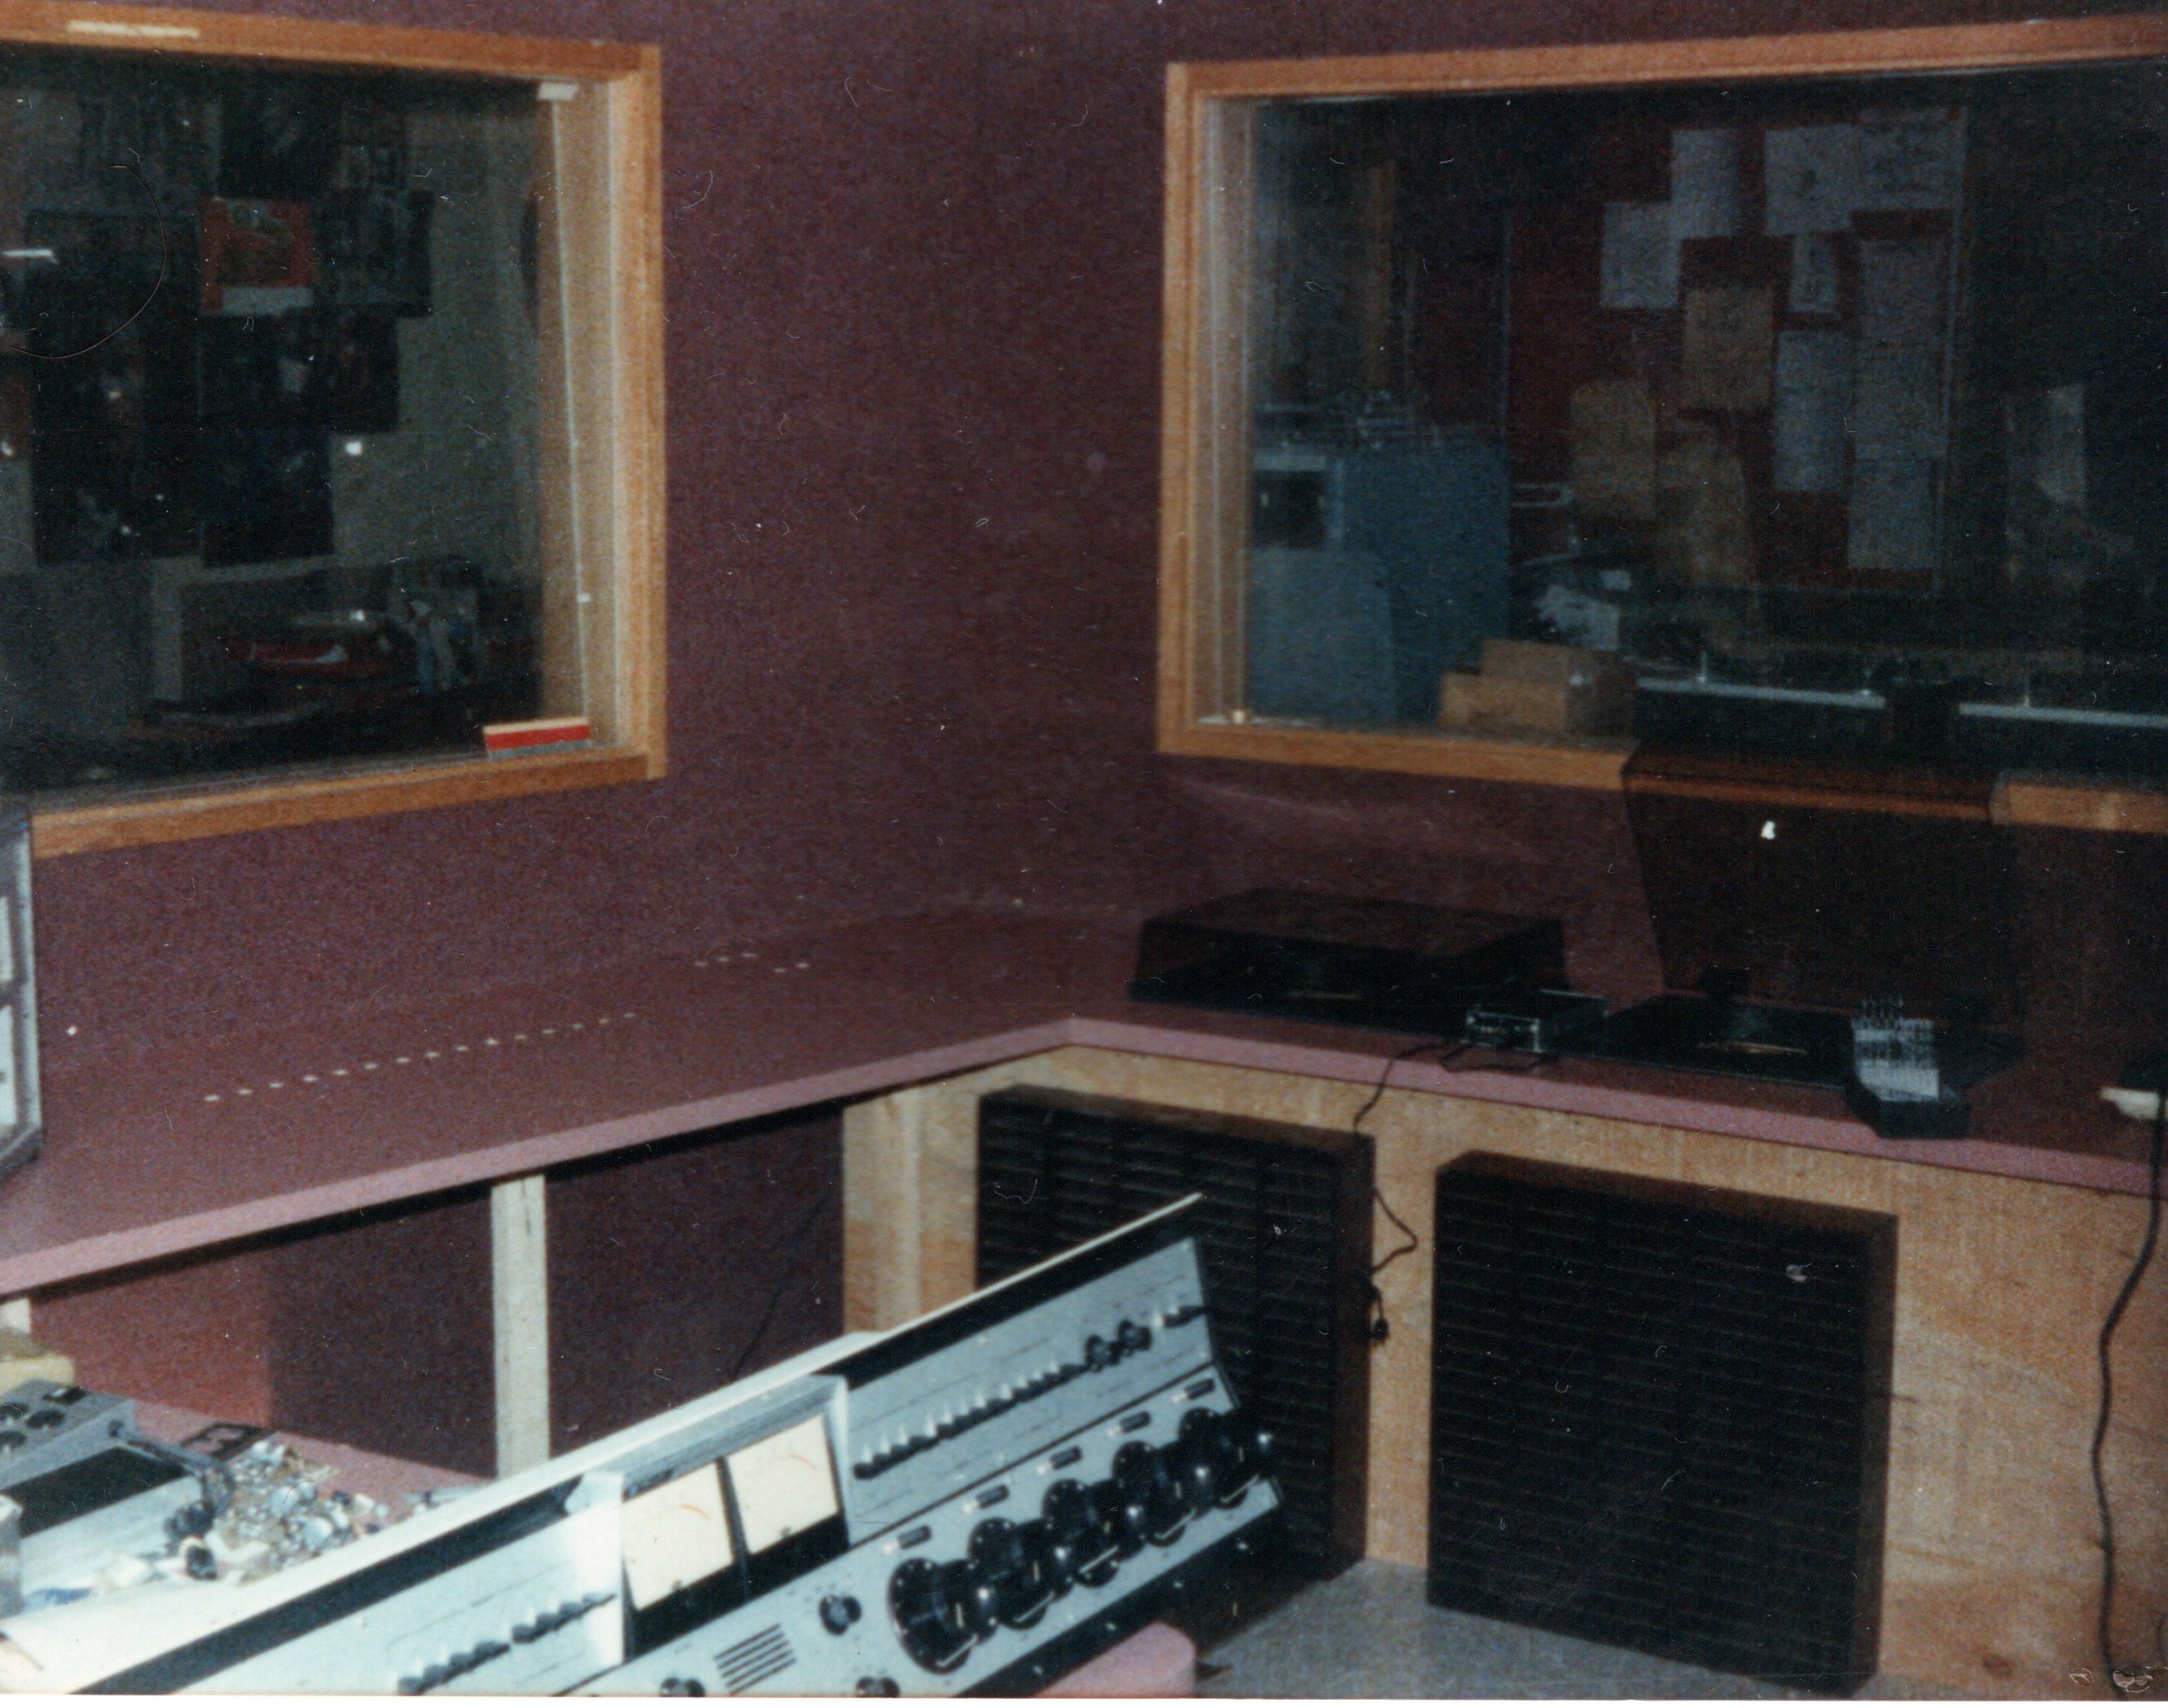 1985-Production Rebuild - With the wall Covering in place and the cabinets coming along.